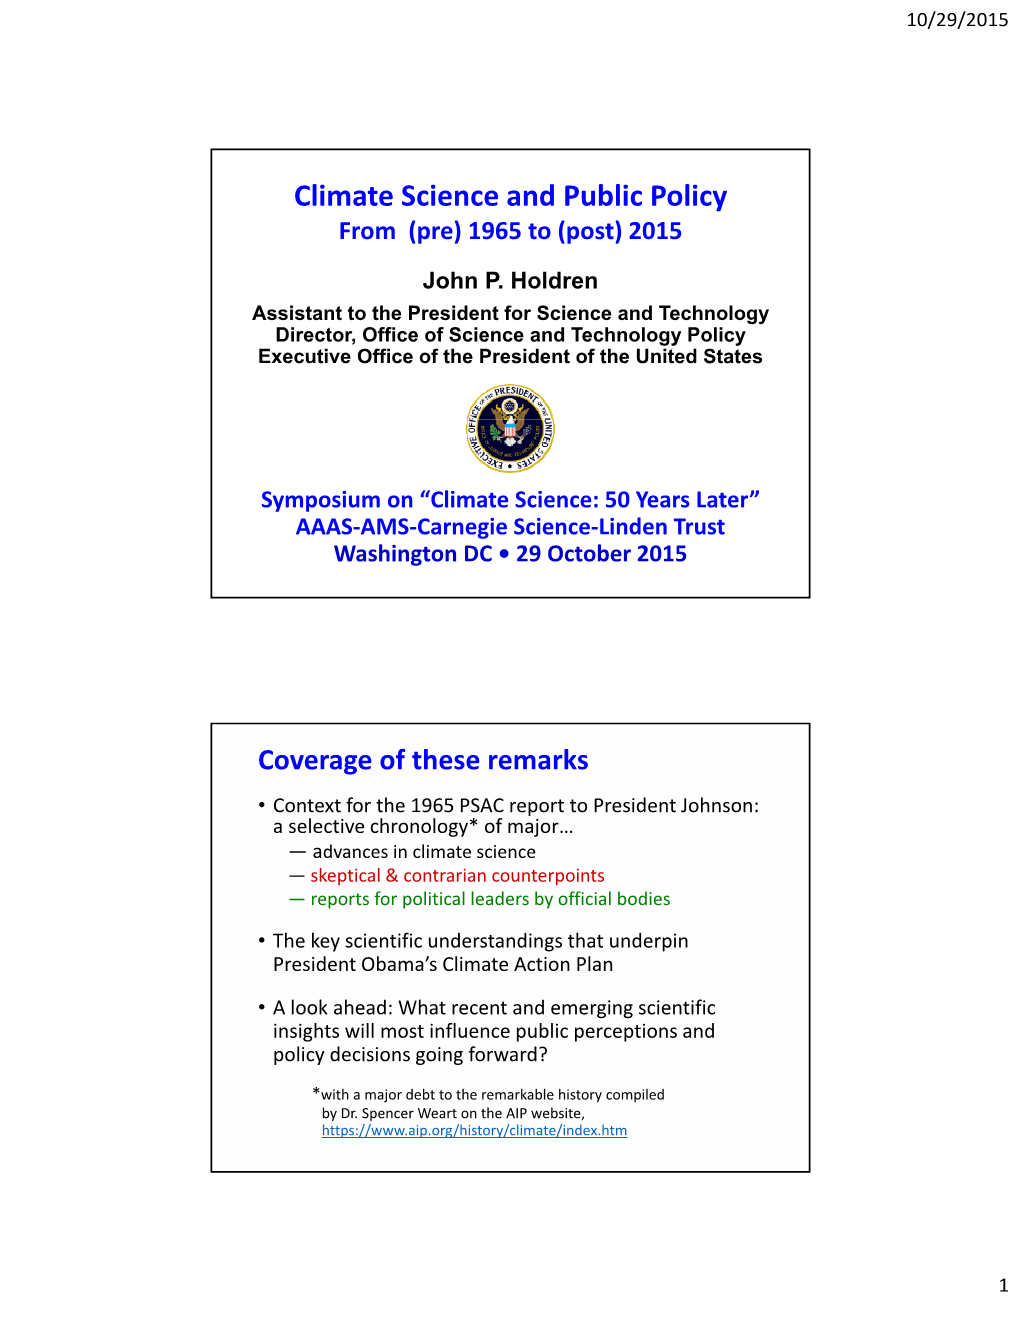 Climate Science and Public Policy from (Pre) 1965 to (Post) 2015